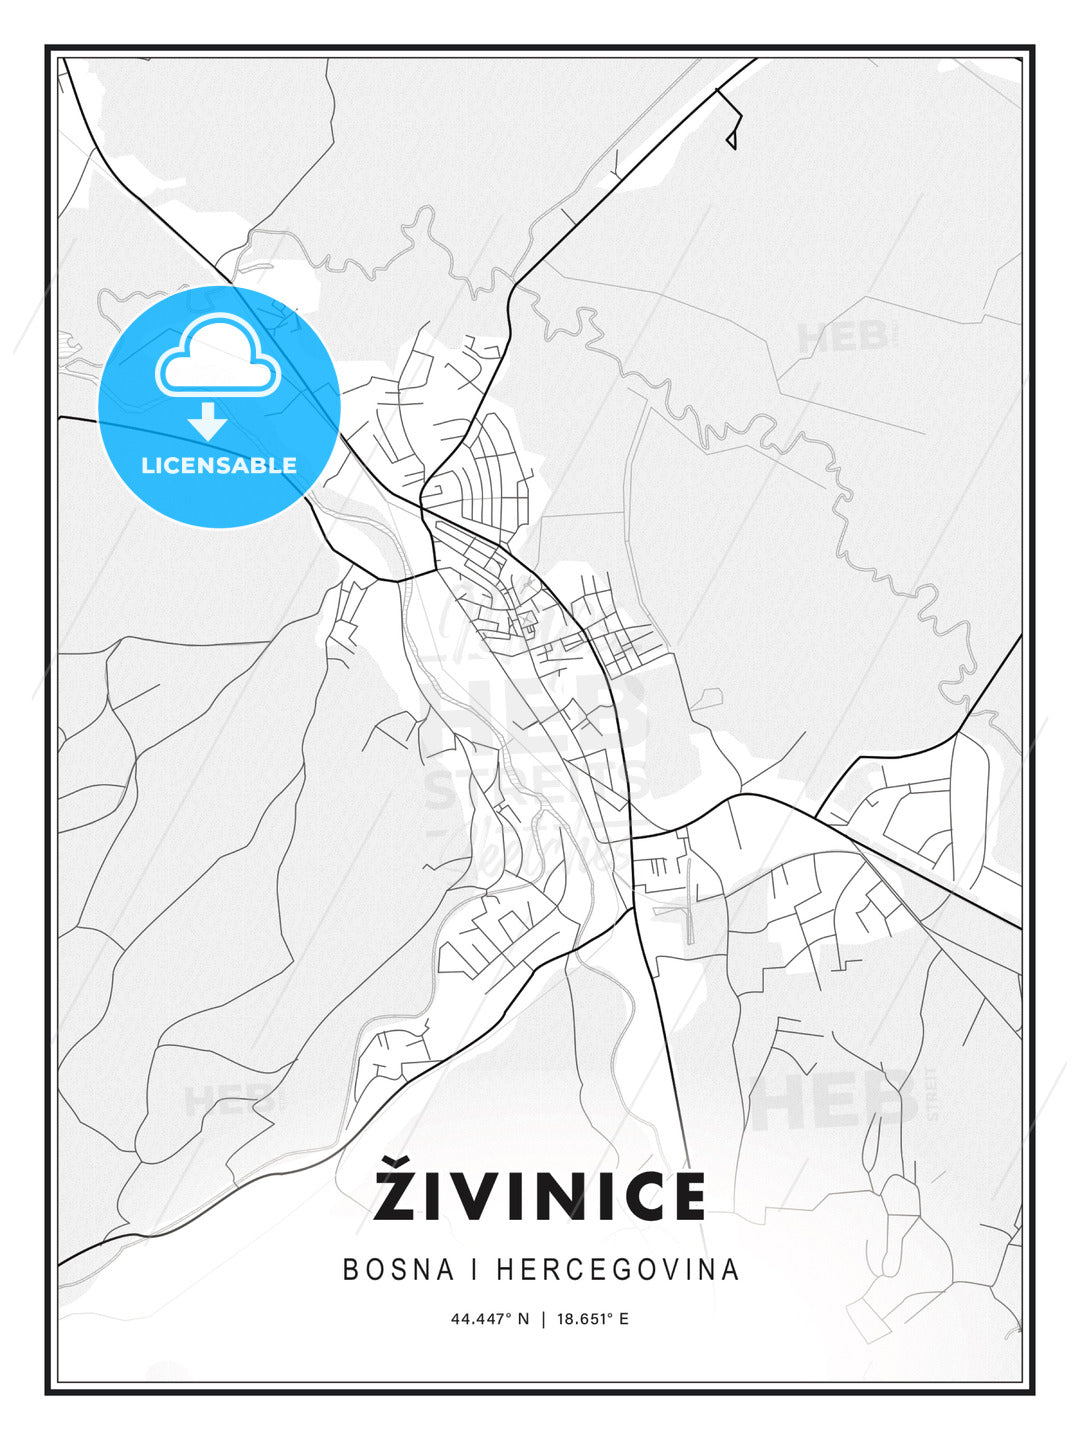 Živinice, Bosnia and Herzegovina, Modern Print Template in Various Formats - HEBSTREITS Sketches